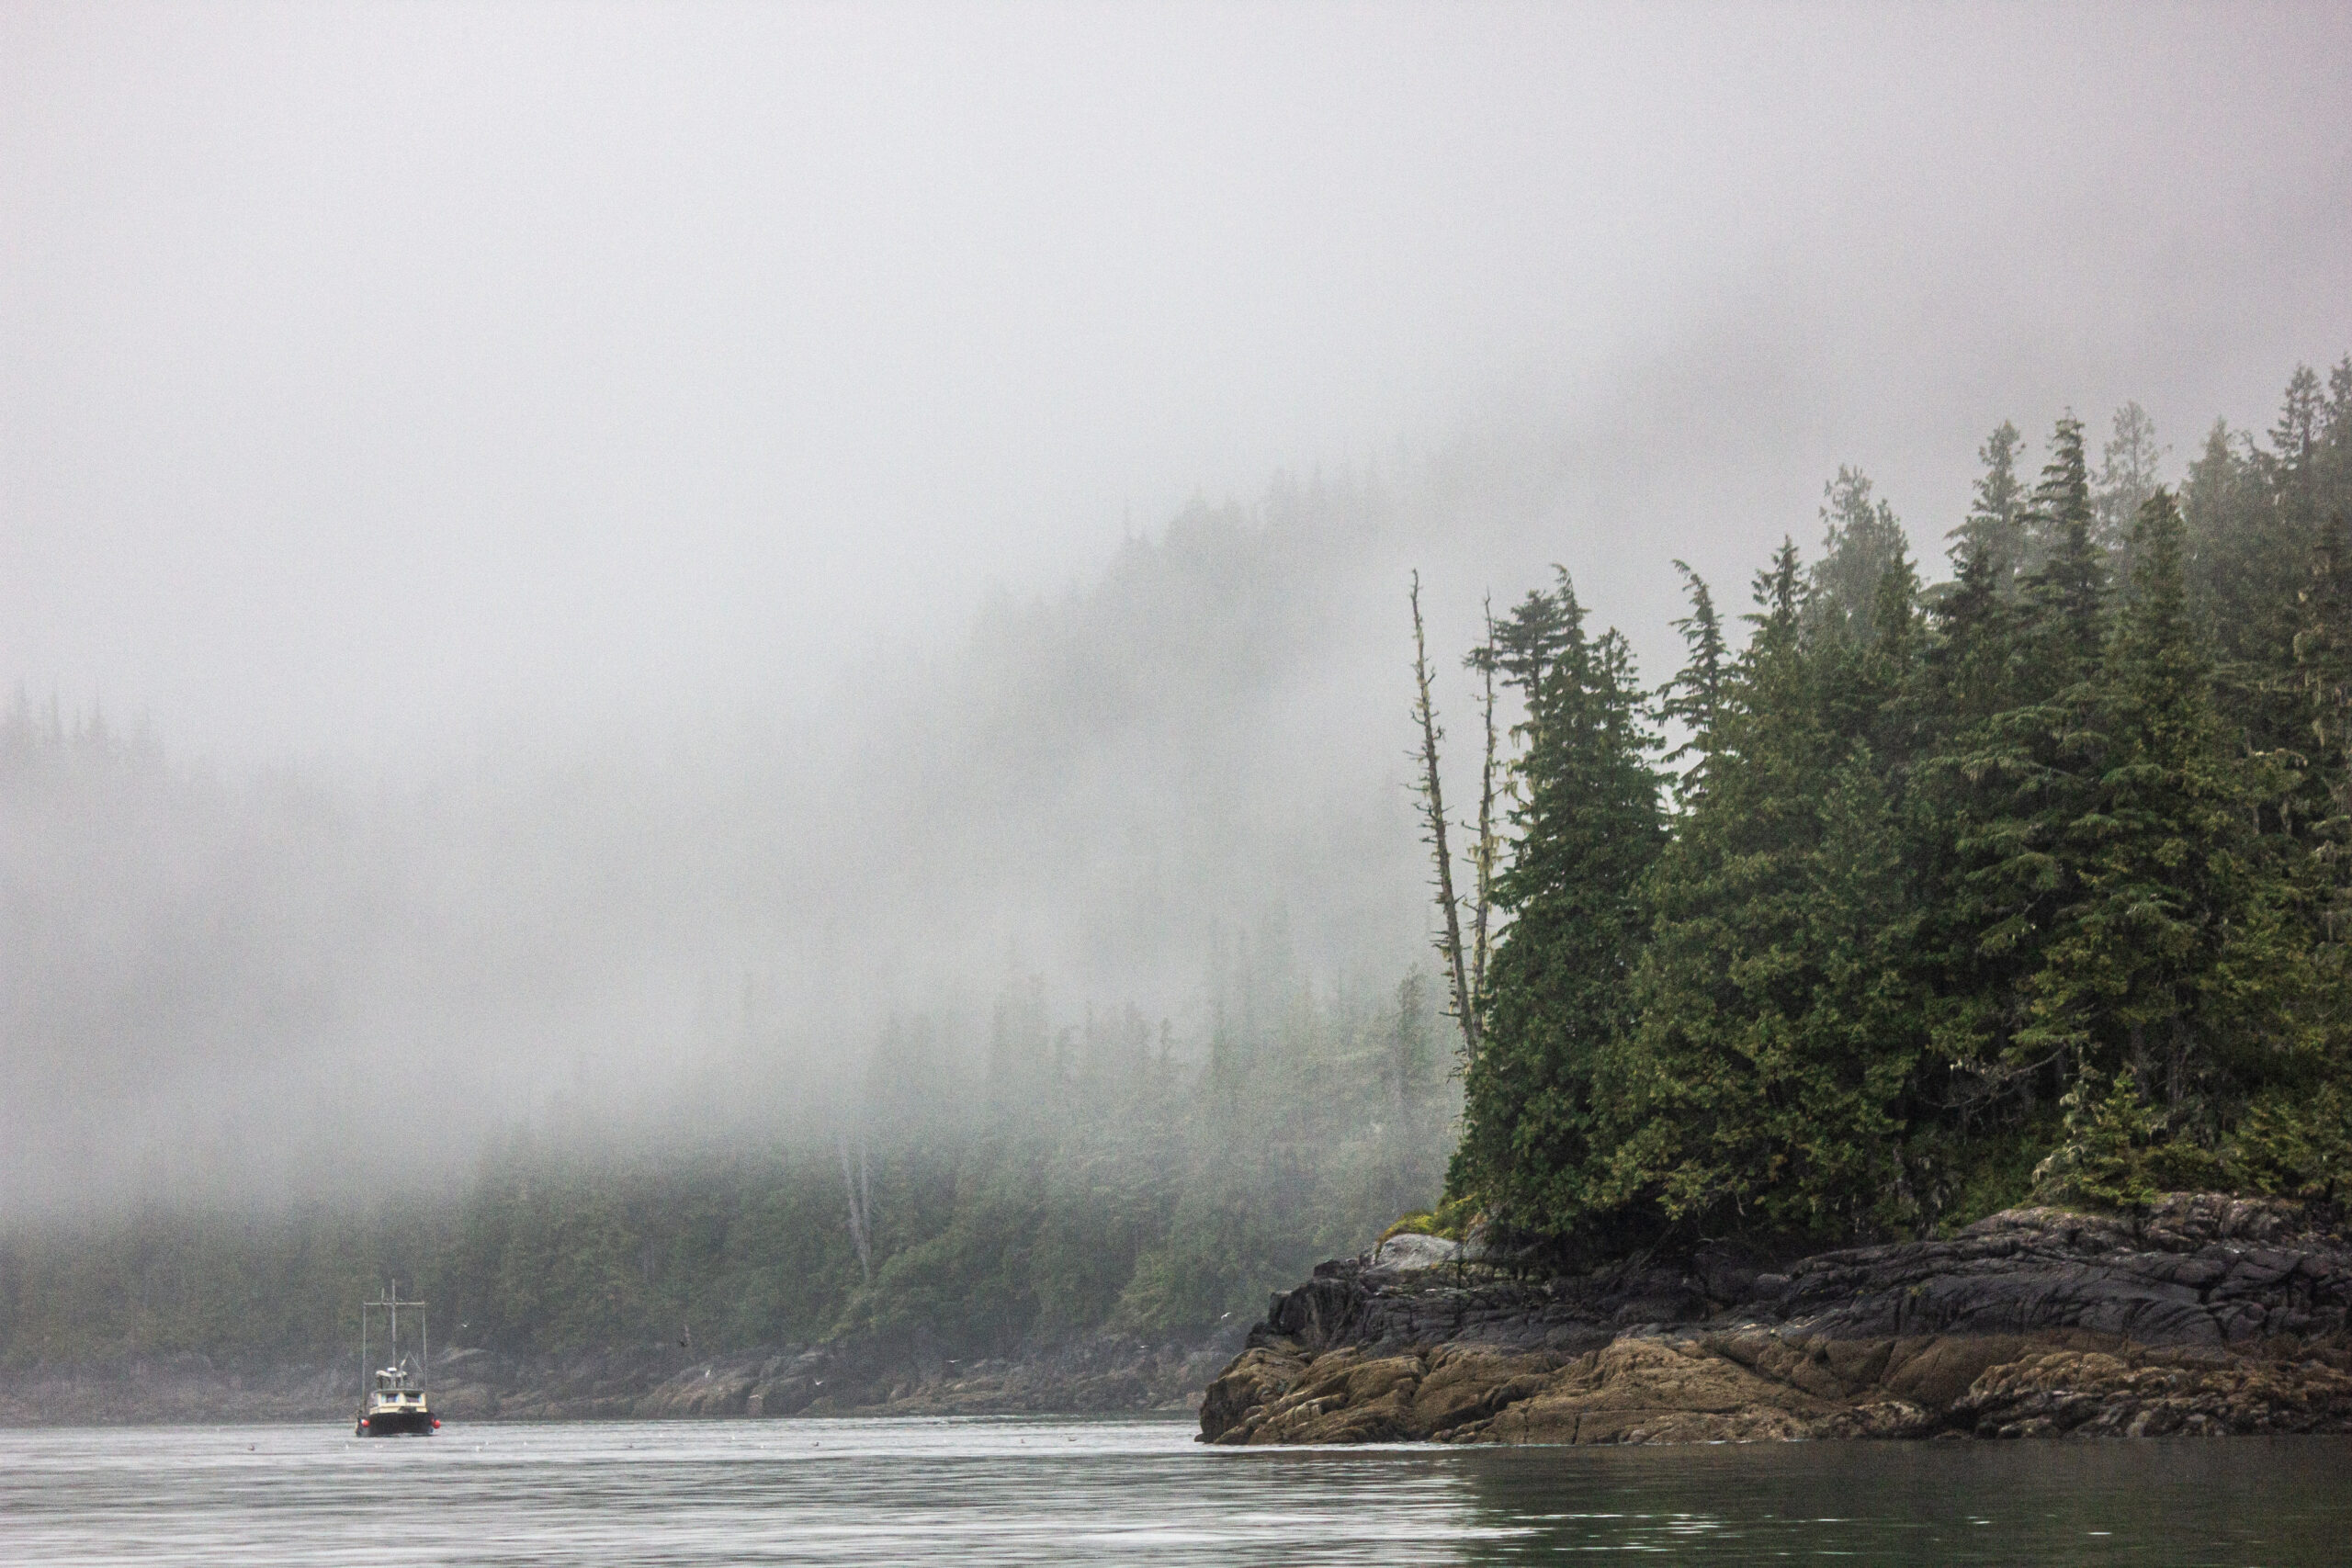 boat in water surrounded by mist and forests